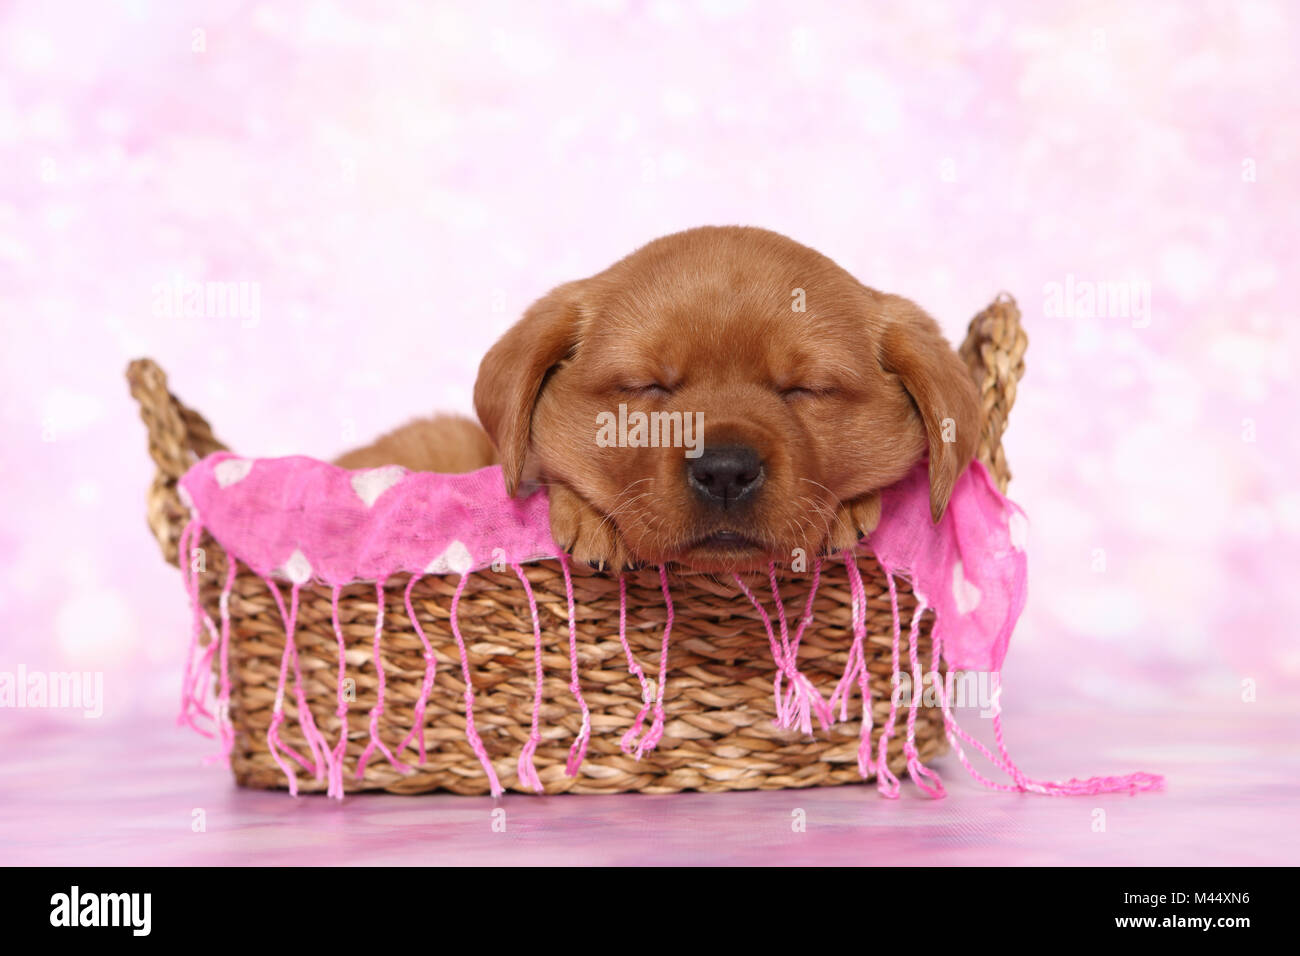 Labrador Retriever. Puppy (6 weeks old) sleeping in a basket. Studio picture seen against a pink background. Germany Stock Photo